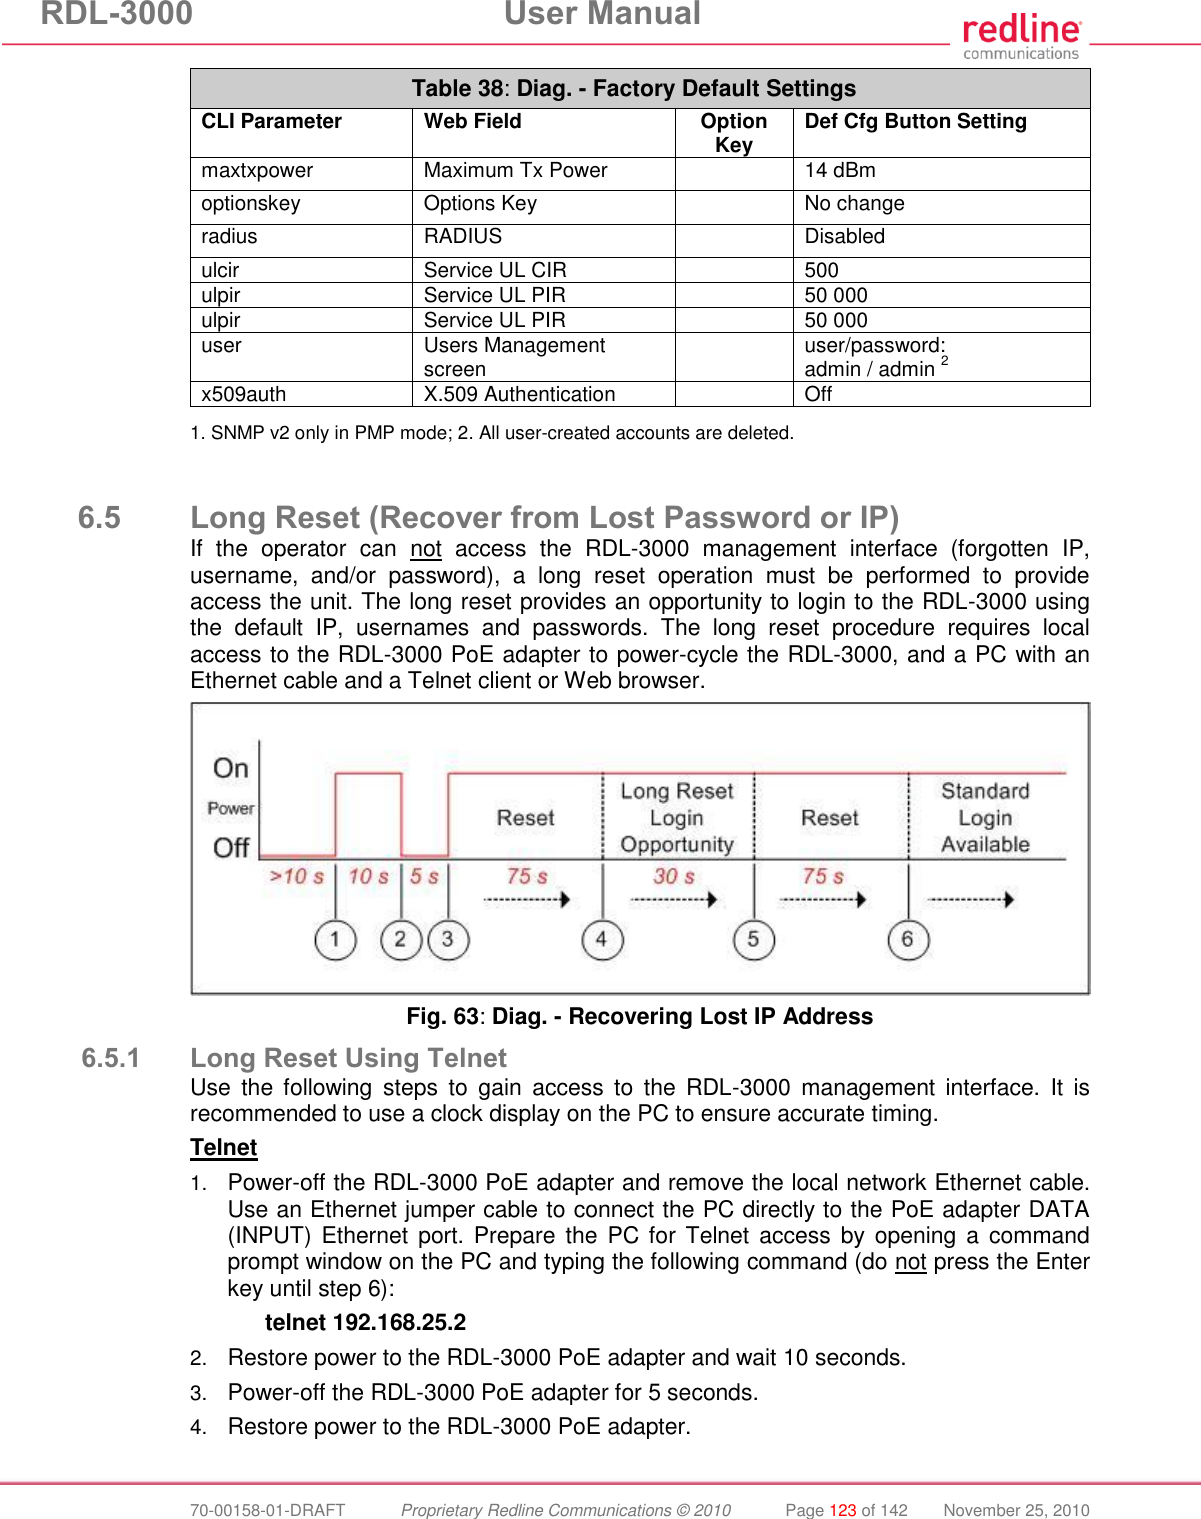 RDL-3000  User Manual  70-00158-01-DRAFT  Proprietary Redline Communications © 2010  Page 123 of 142  November 25, 2010 Table 38: Diag. - Factory Default Settings CLI Parameter Web Field Option Key Def Cfg Button Setting maxtxpower Maximum Tx Power  14 dBm optionskey Options Key  No change radius RADIUS  Disabled ulcir Service UL CIR  500 ulpir Service UL PIR  50 000 ulpir Service UL PIR  50 000 user Users Management screen  user/password: admin / admin 2 x509auth X.509 Authentication  Off  1. SNMP v2 only in PMP mode; 2. All user-created accounts are deleted.   6.5 Long Reset (Recover from Lost Password or IP) If  the  operator  can  not  access  the  RDL-3000  management  interface  (forgotten  IP, username,  and/or  password),  a  long  reset  operation  must  be  performed  to  provide access the unit. The long reset provides an opportunity to login to the RDL-3000 using the  default  IP,  usernames  and  passwords.  The  long  reset  procedure  requires  local access to the RDL-3000 PoE adapter to power-cycle the RDL-3000, and a PC with an Ethernet cable and a Telnet client or Web browser.   Fig. 63: Diag. - Recovering Lost IP Address 6.5.1 Long Reset Using Telnet Use  the  following  steps  to  gain  access  to  the  RDL-3000  management  interface.  It  is recommended to use a clock display on the PC to ensure accurate timing. Telnet 1. Power-off the RDL-3000 PoE adapter and remove the local network Ethernet cable. Use an Ethernet jumper cable to connect the PC directly to the PoE adapter DATA (INPUT) Ethernet port. Prepare  the  PC for  Telnet access  by opening a  command prompt window on the PC and typing the following command (do not press the Enter key until step 6):   telnet 192.168.25.2 2. Restore power to the RDL-3000 PoE adapter and wait 10 seconds. 3. Power-off the RDL-3000 PoE adapter for 5 seconds. 4. Restore power to the RDL-3000 PoE adapter. 